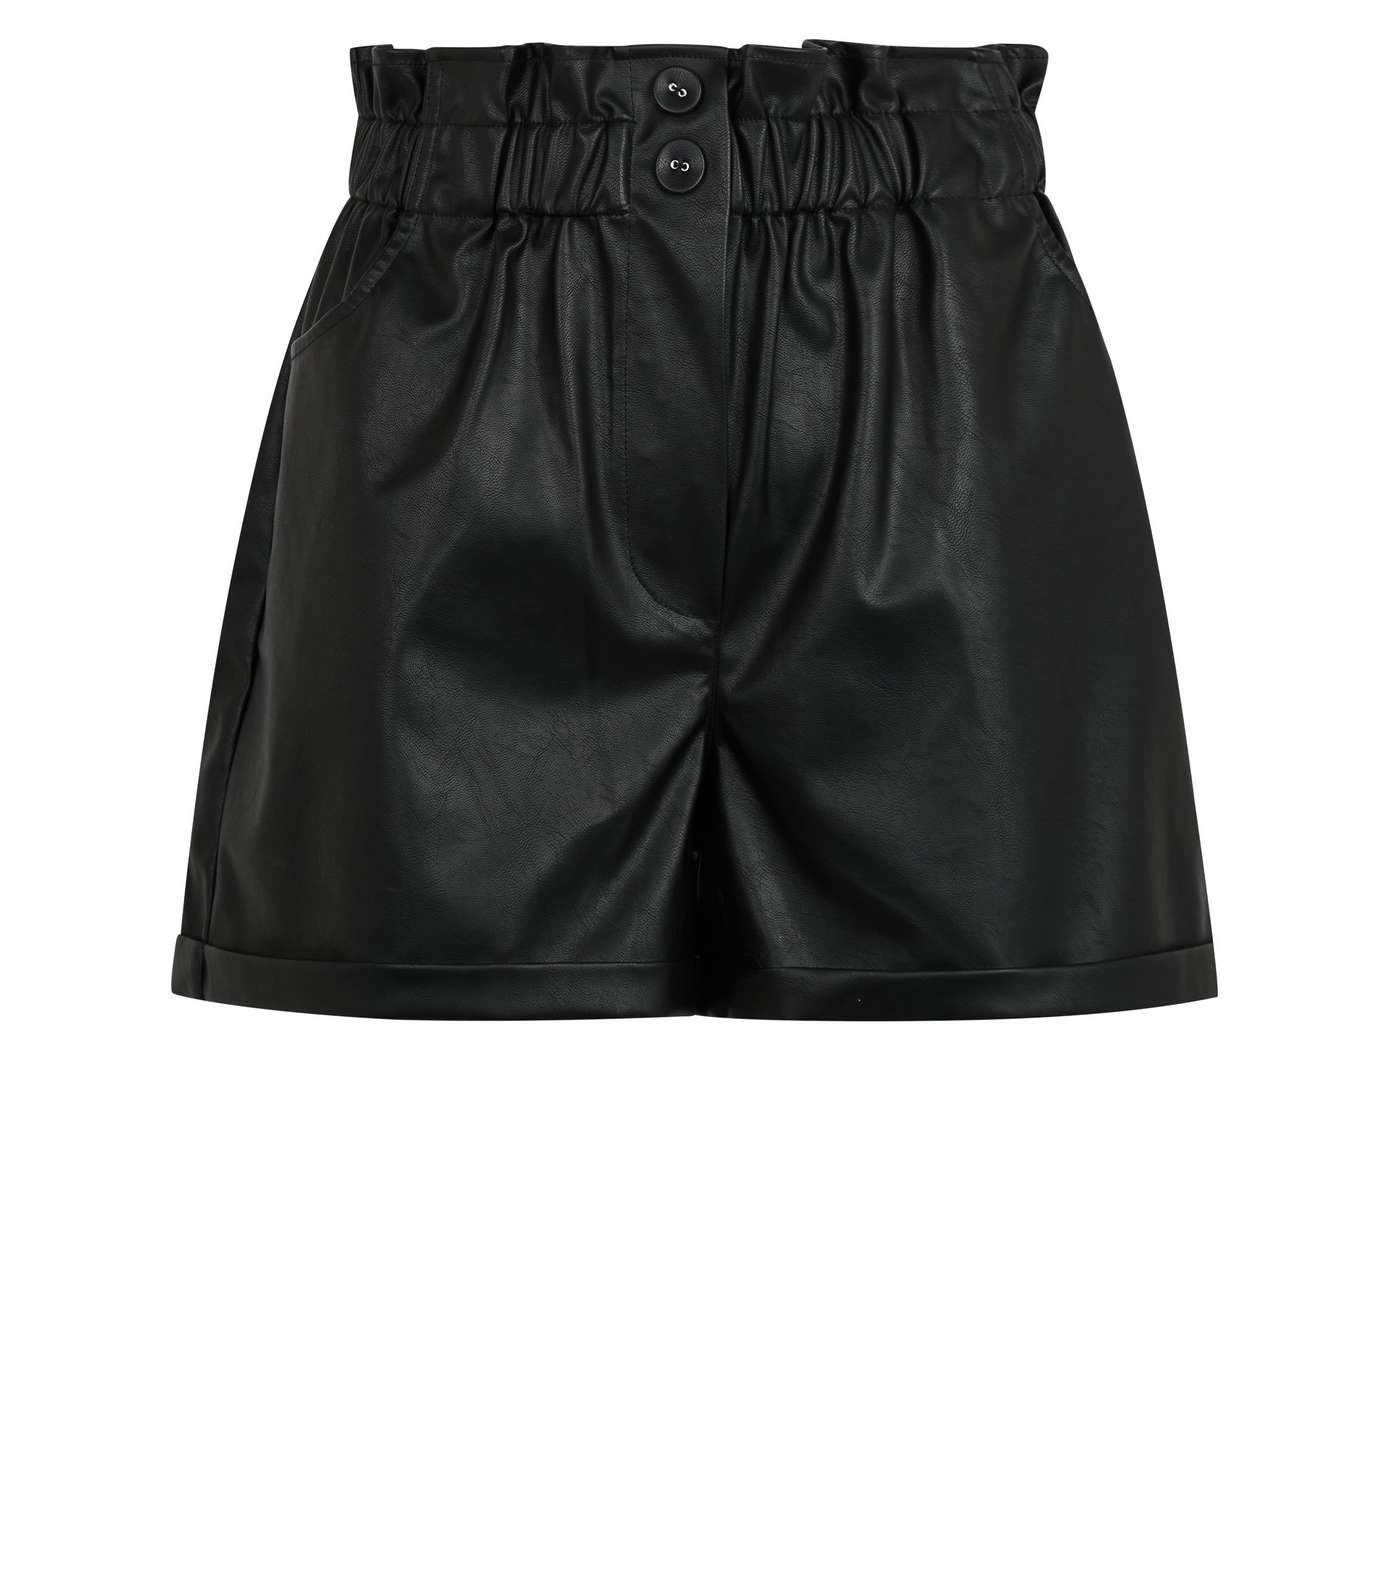 Black Leather-Look Button High Waist Shorts Image 4